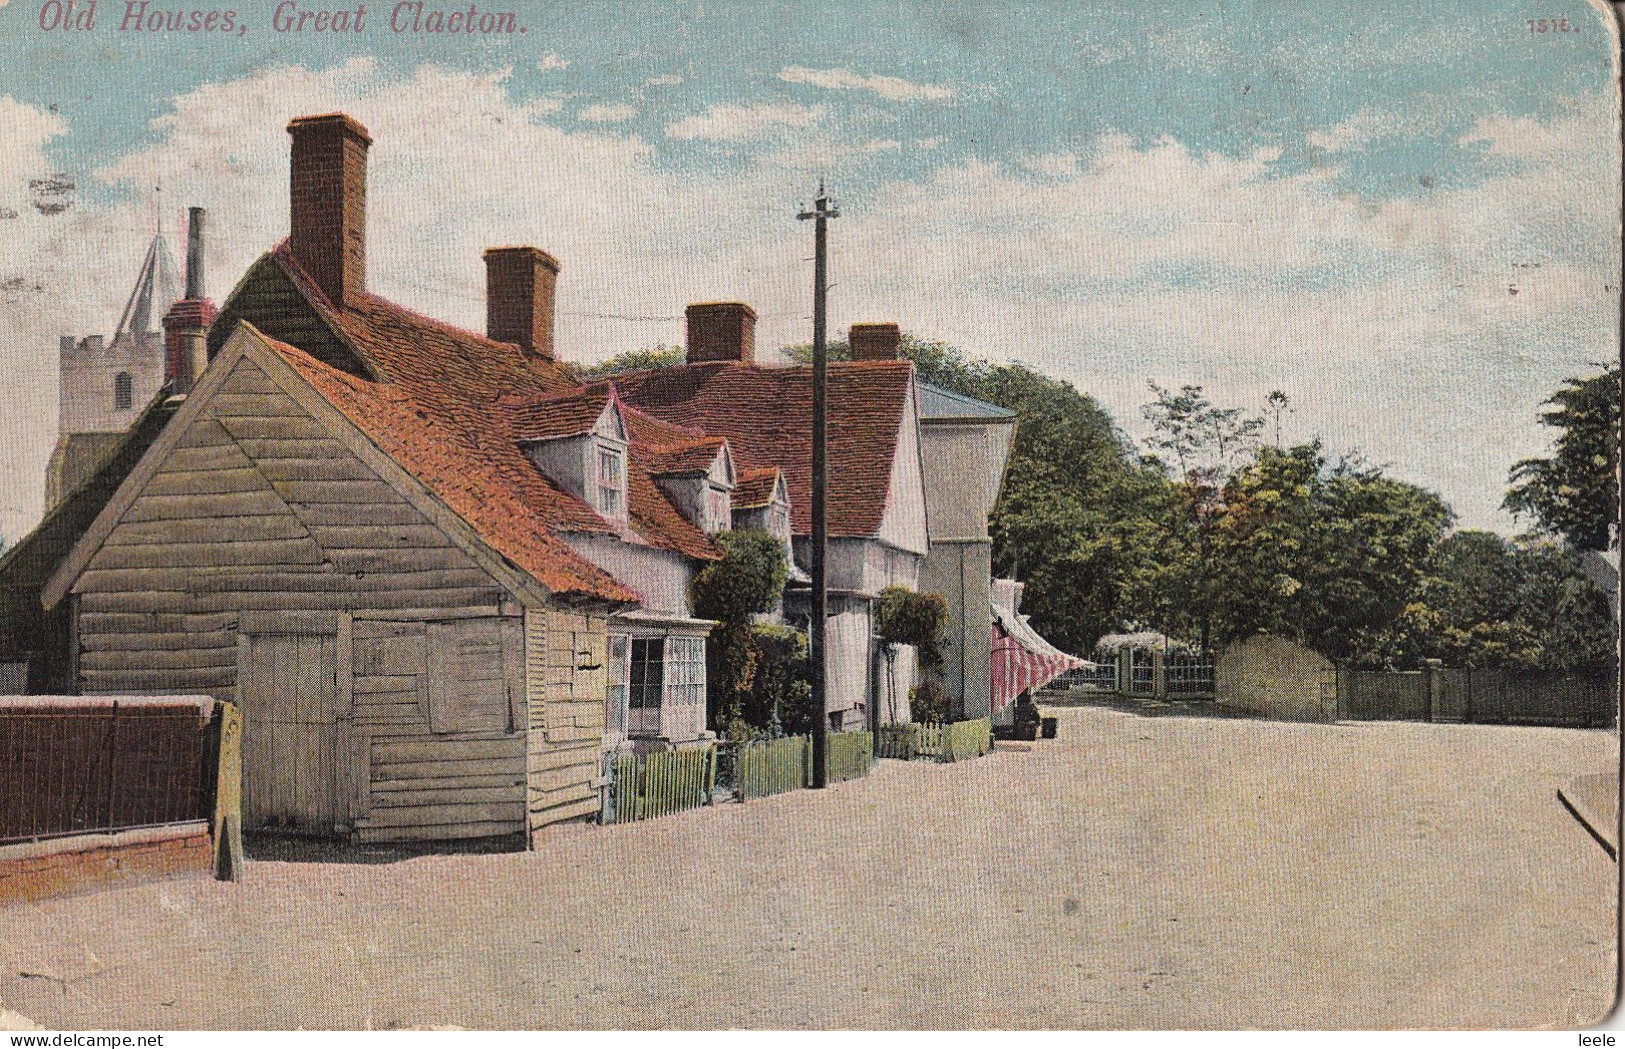 CP33. Vintage Postcard. Old Houses. Great Clacton. Essex - Clacton On Sea